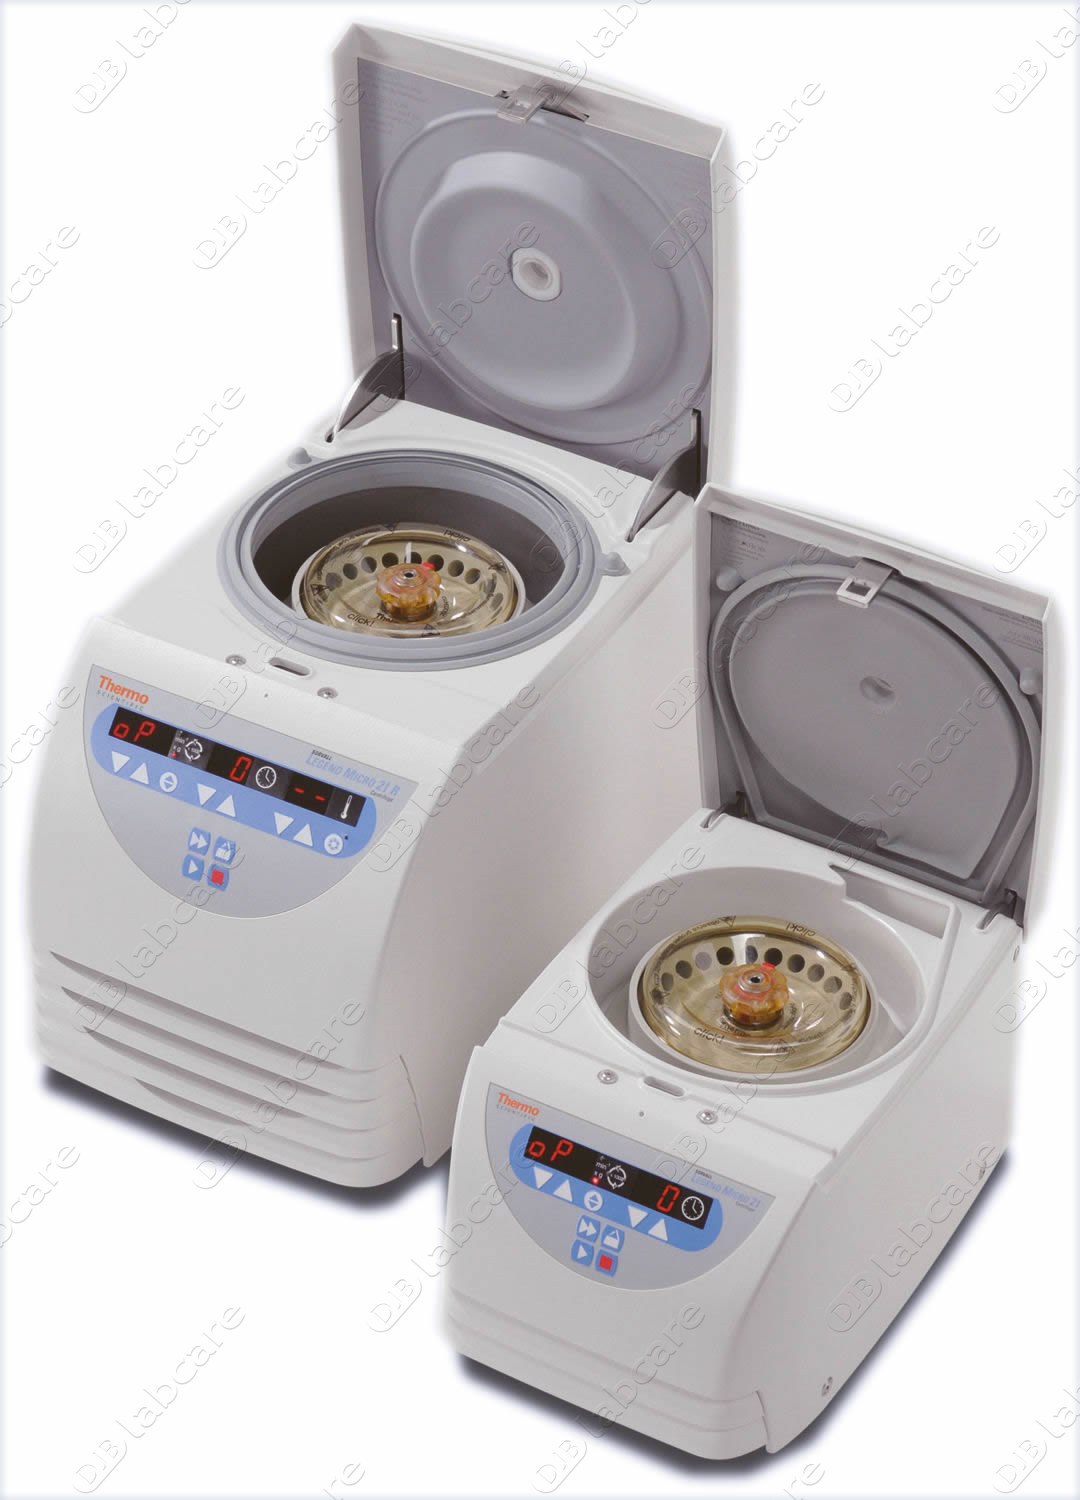 50/60 Hz 230V THERMO FISHER SCIENTIFIC 75002415 Heraeus Pico 21 Microcentrifuge 24 x 1.5/2.0 mL Rotor with ClickSeal Bio-Containment Lid 